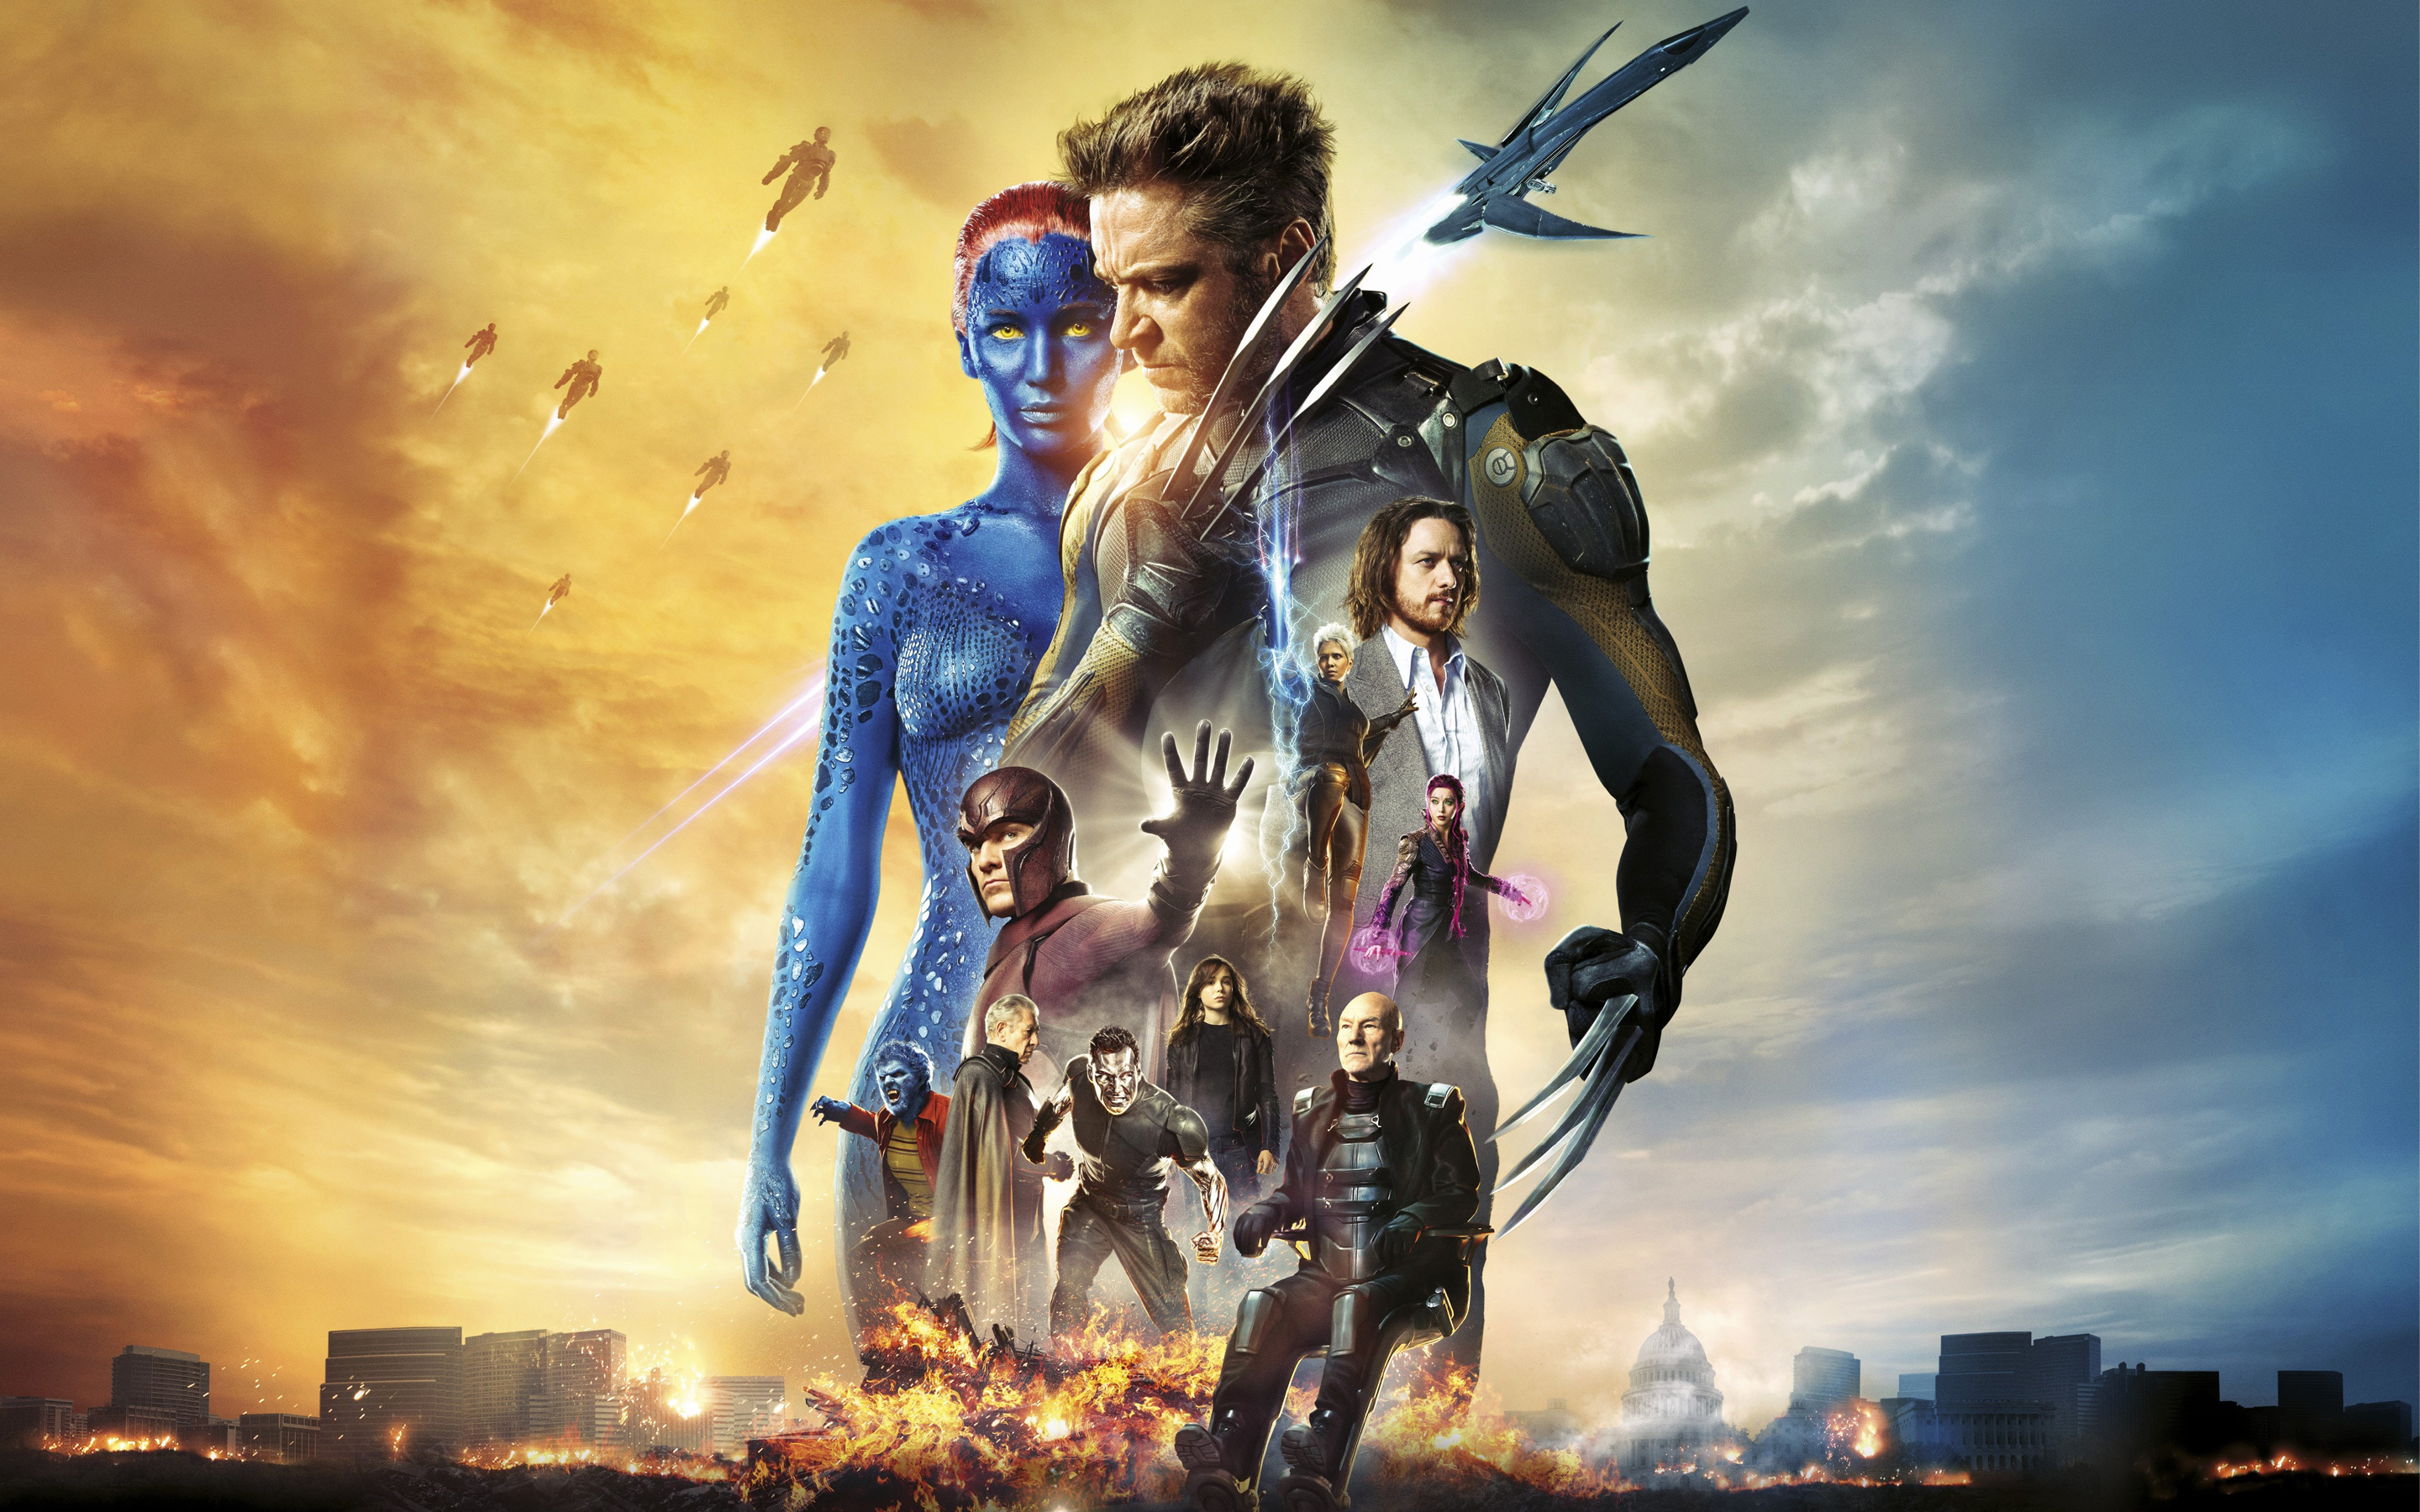 x men: days of future past, movie wallpapers for tablet